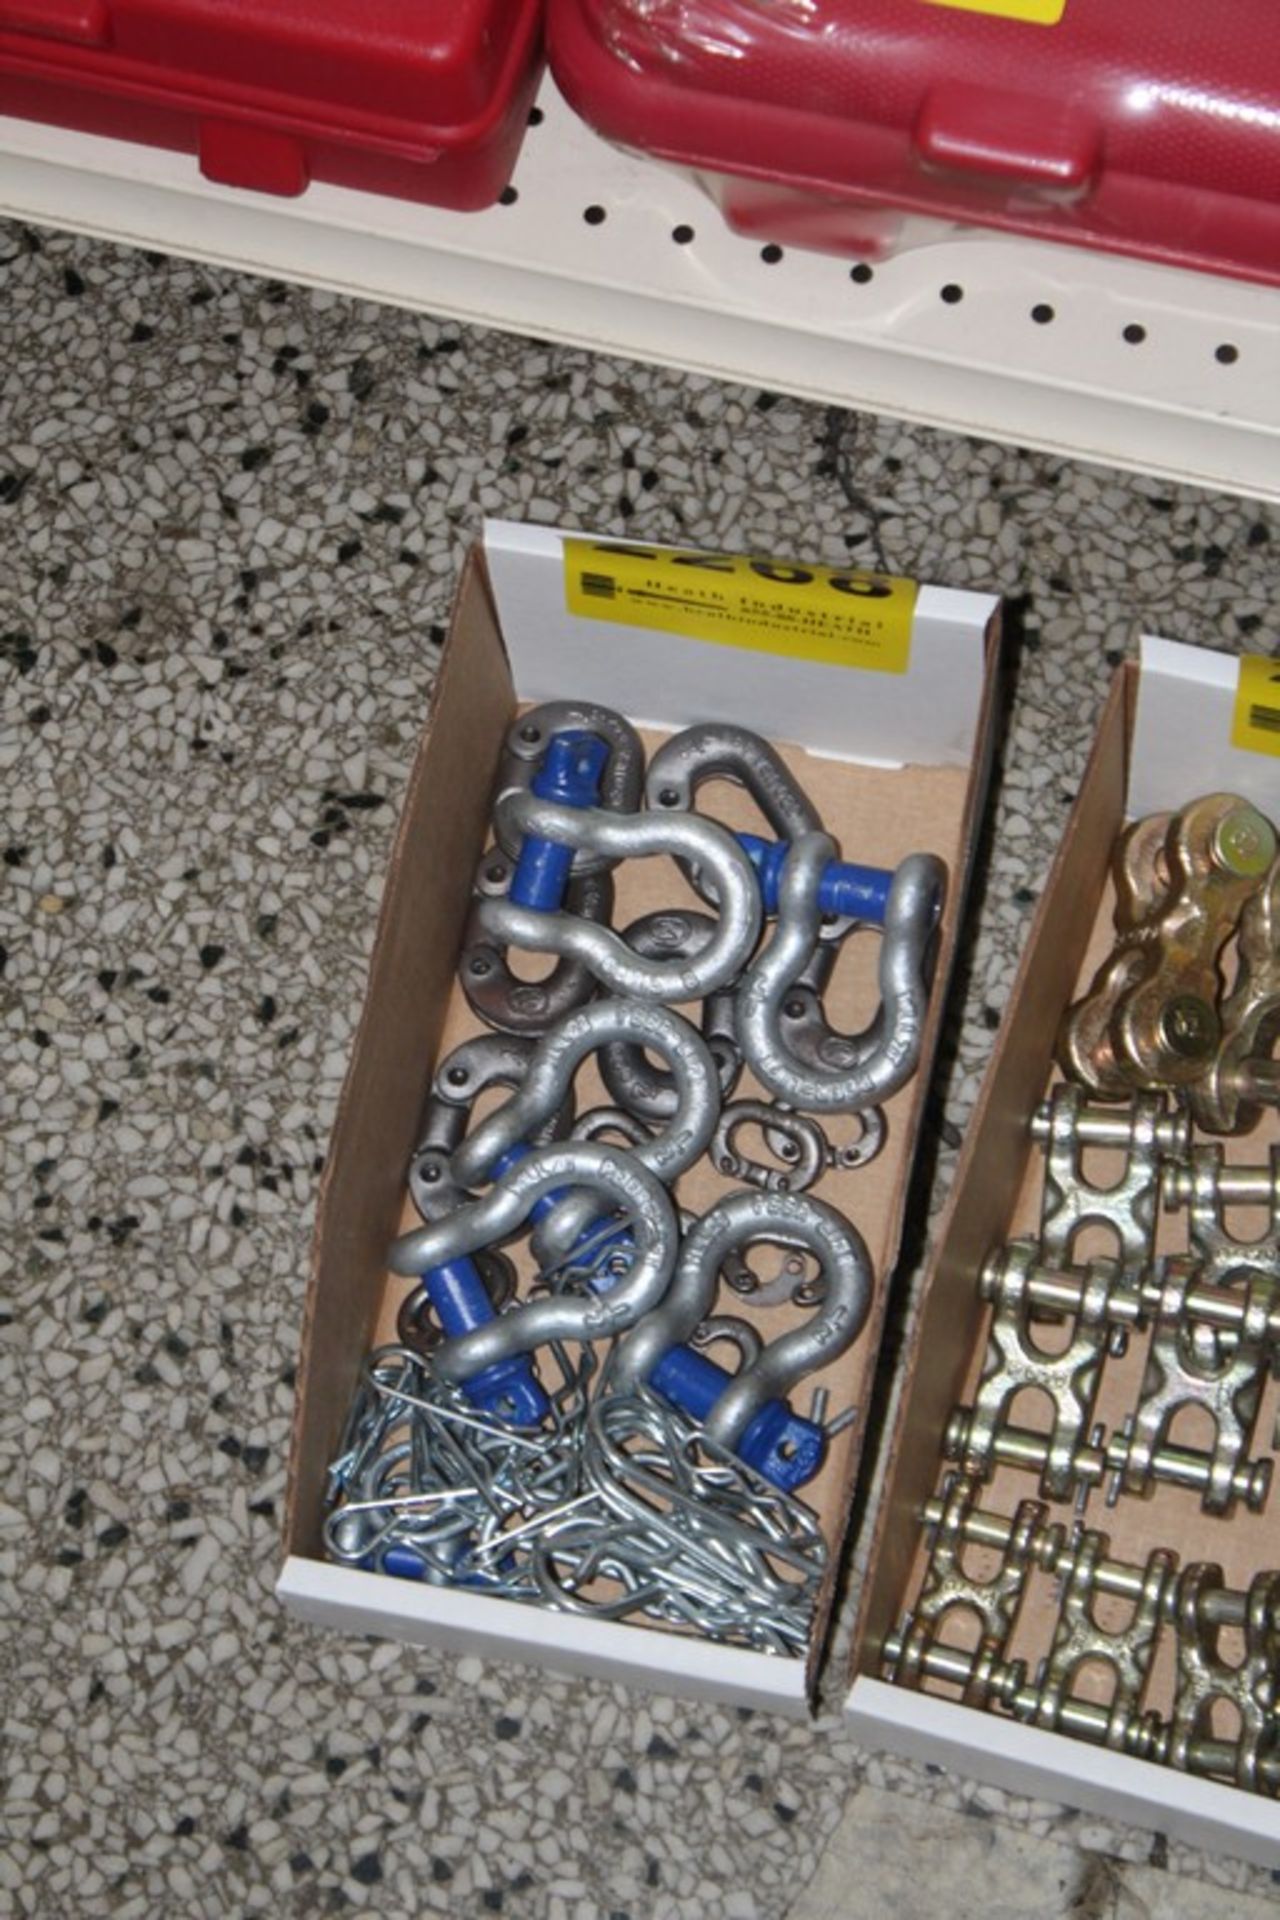 ASSORTED SHACKLES IN BOX